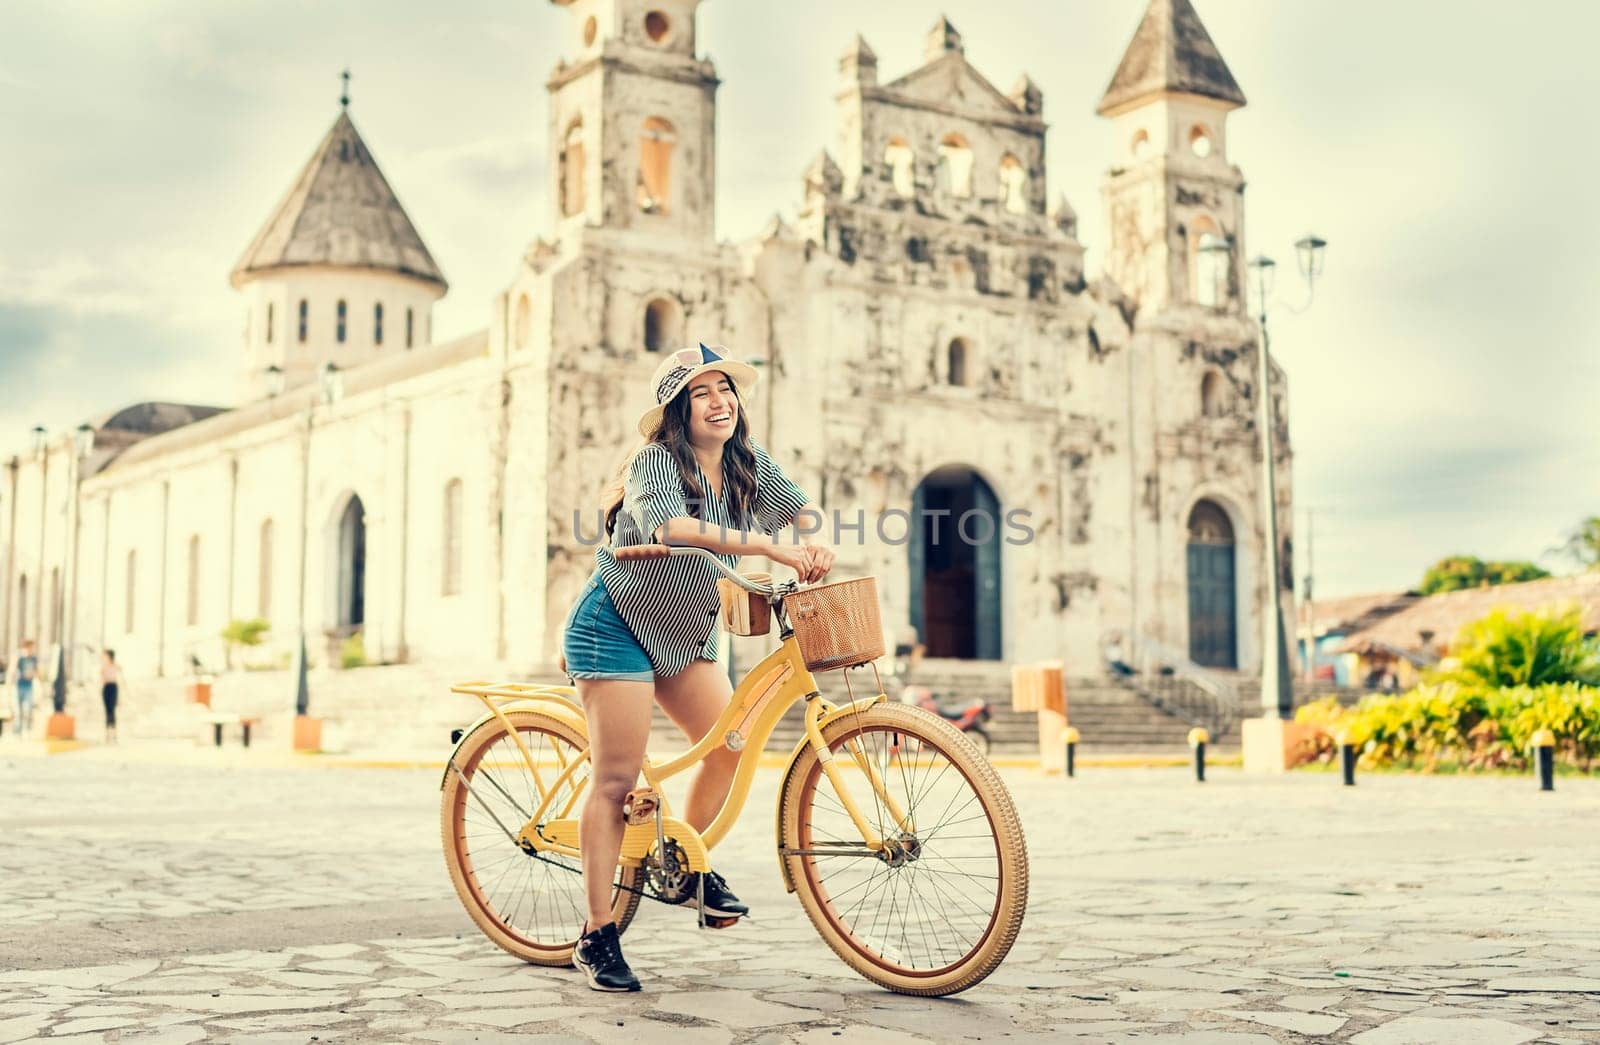 Lifestyle of a happy girl in hat on bicycle on the street. Granada, Nicaragua. Happy girl in hat riding a bicycle at sunset. Tourism and travel concept